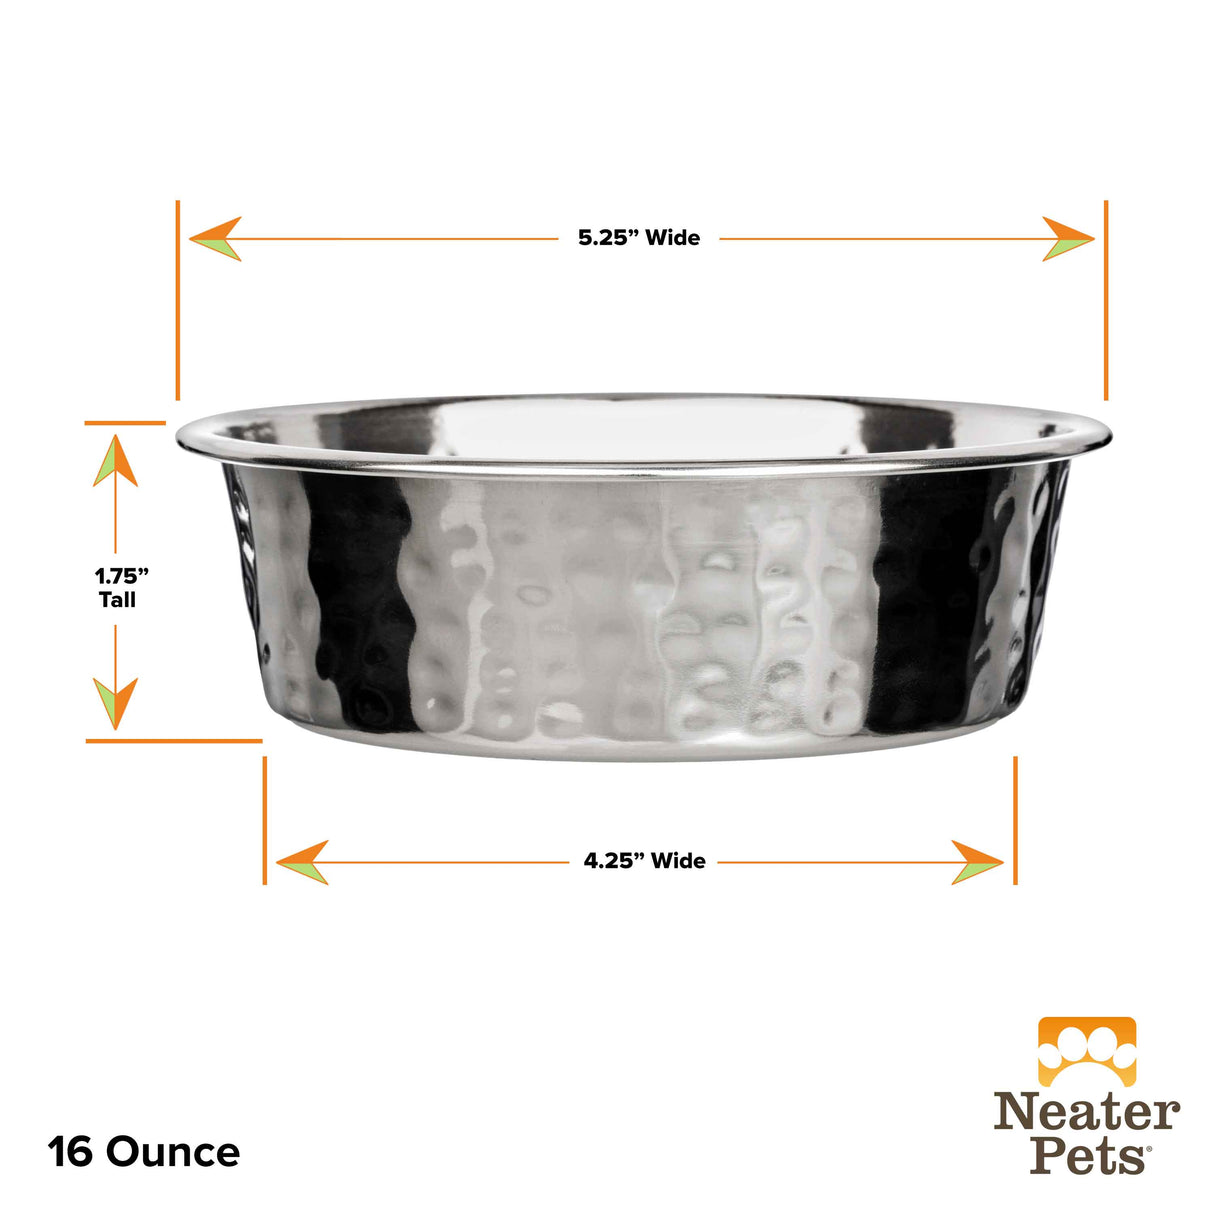 Dimensions of the 16 ounce Hammered Stainless Steel Bowl